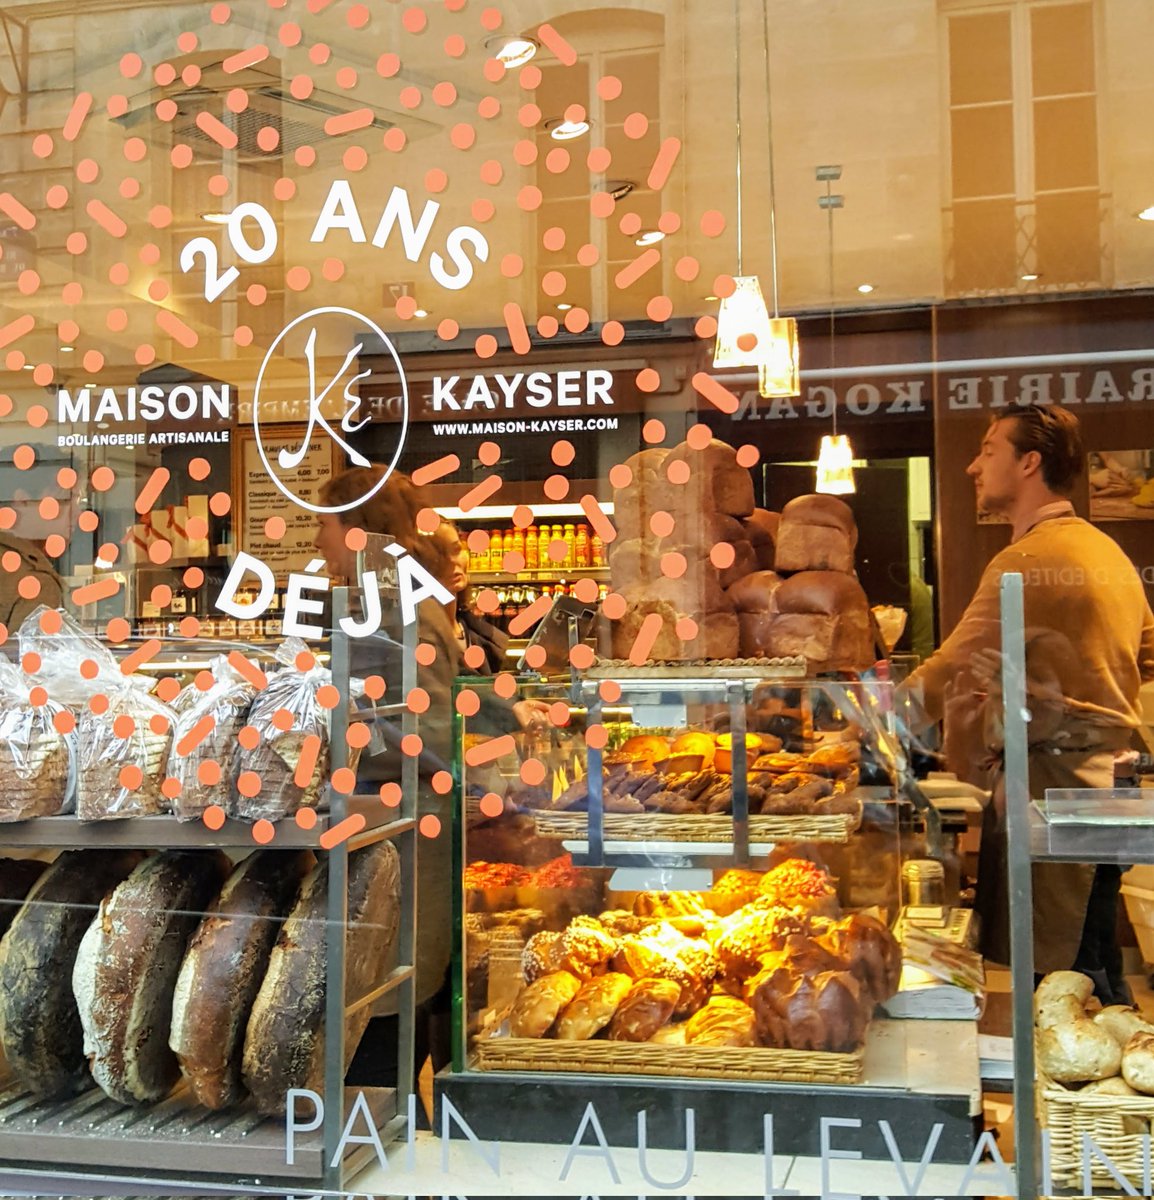 Amazingly, I can still smell the #bread in this old snapshot from my saved photos #Paris #TheParisEffect #delicious #boulangerie #travel